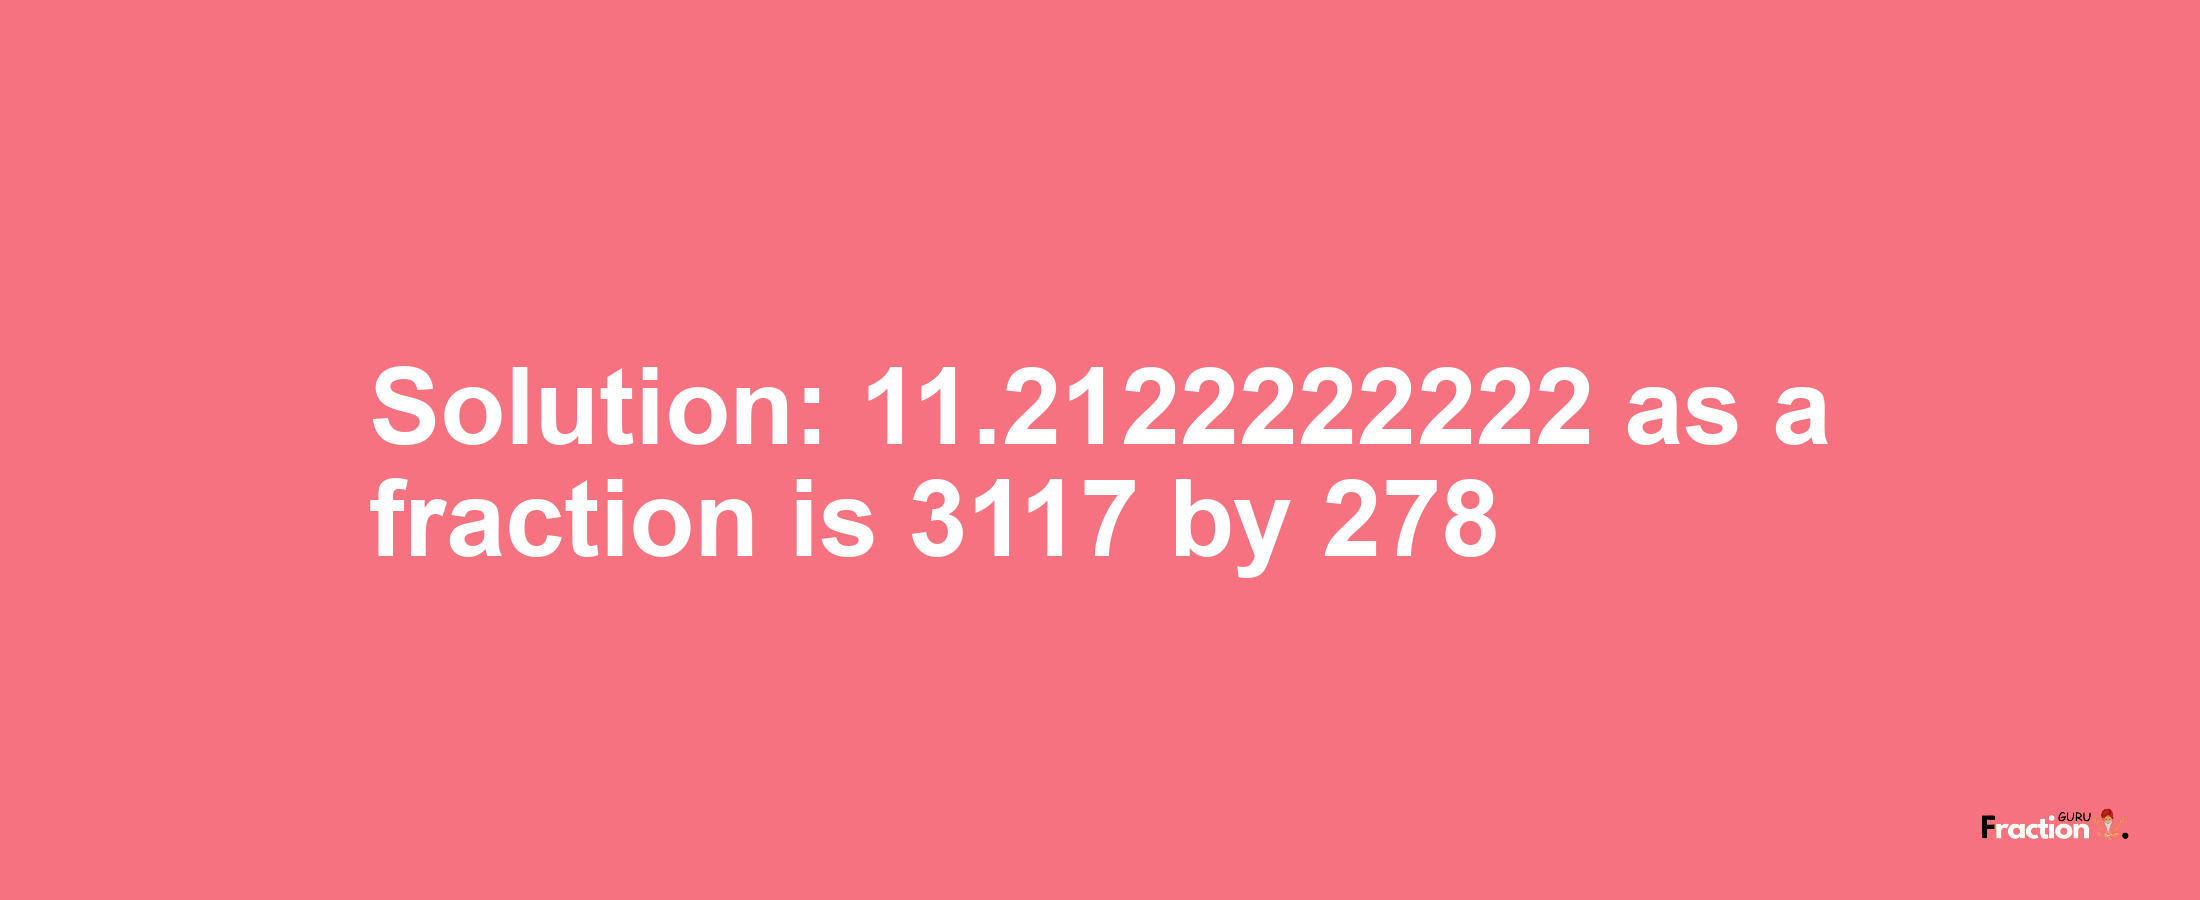 Solution:11.2122222222 as a fraction is 3117/278